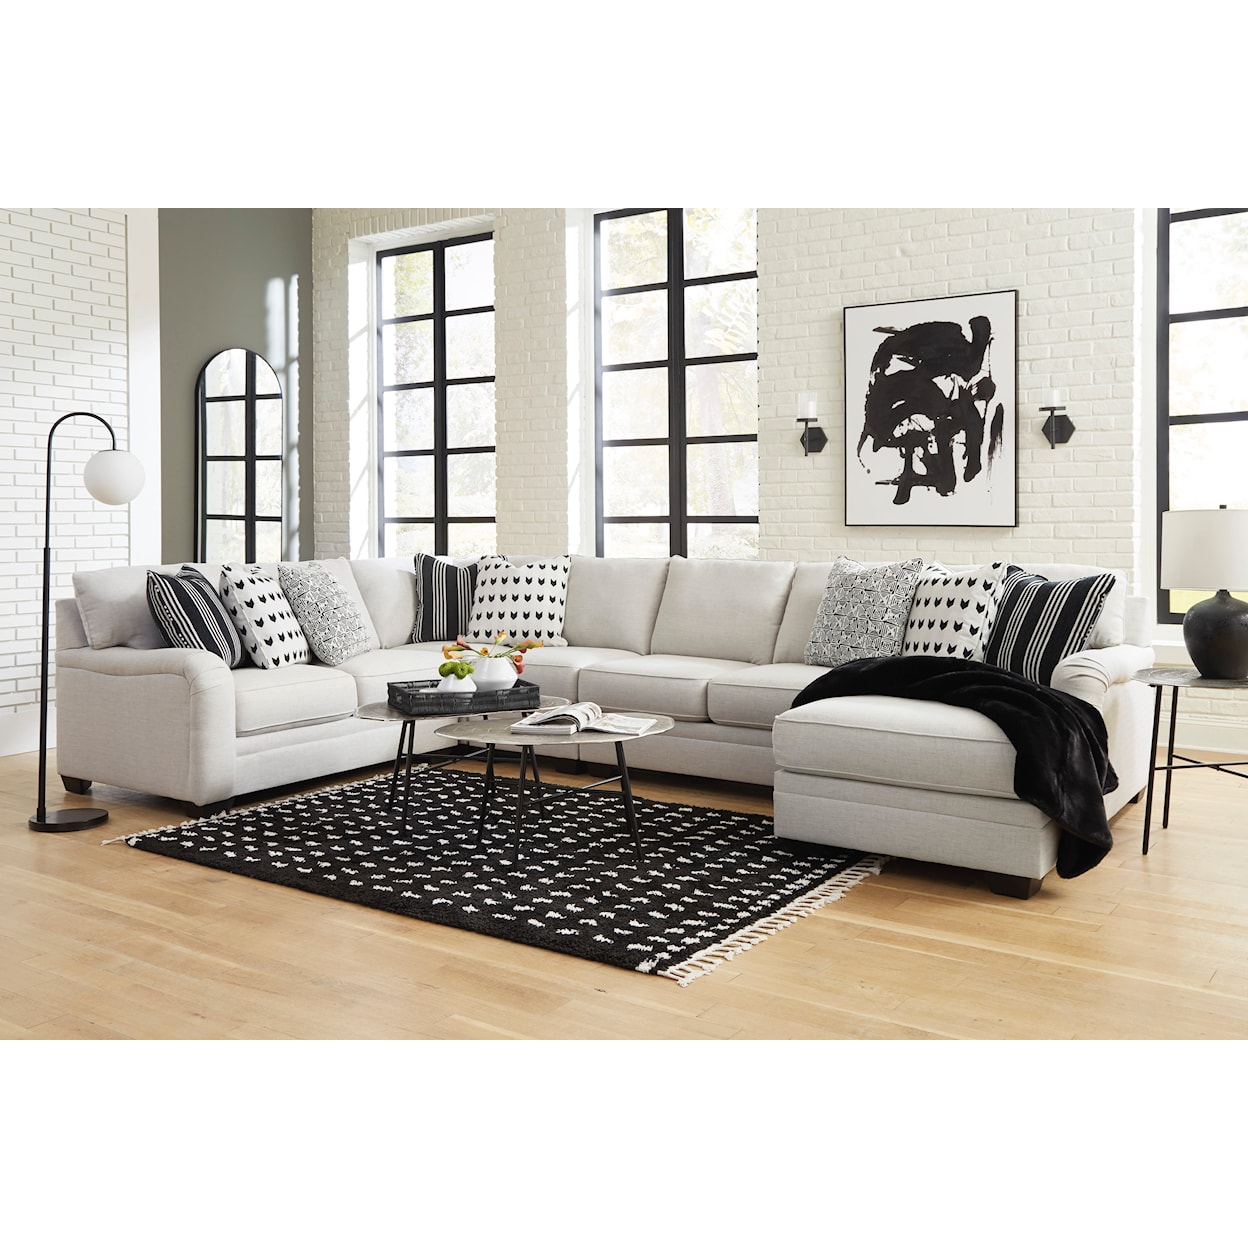 Ashley Furniture Signature Design Huntsworth 5-Piece Sectional with Chaise